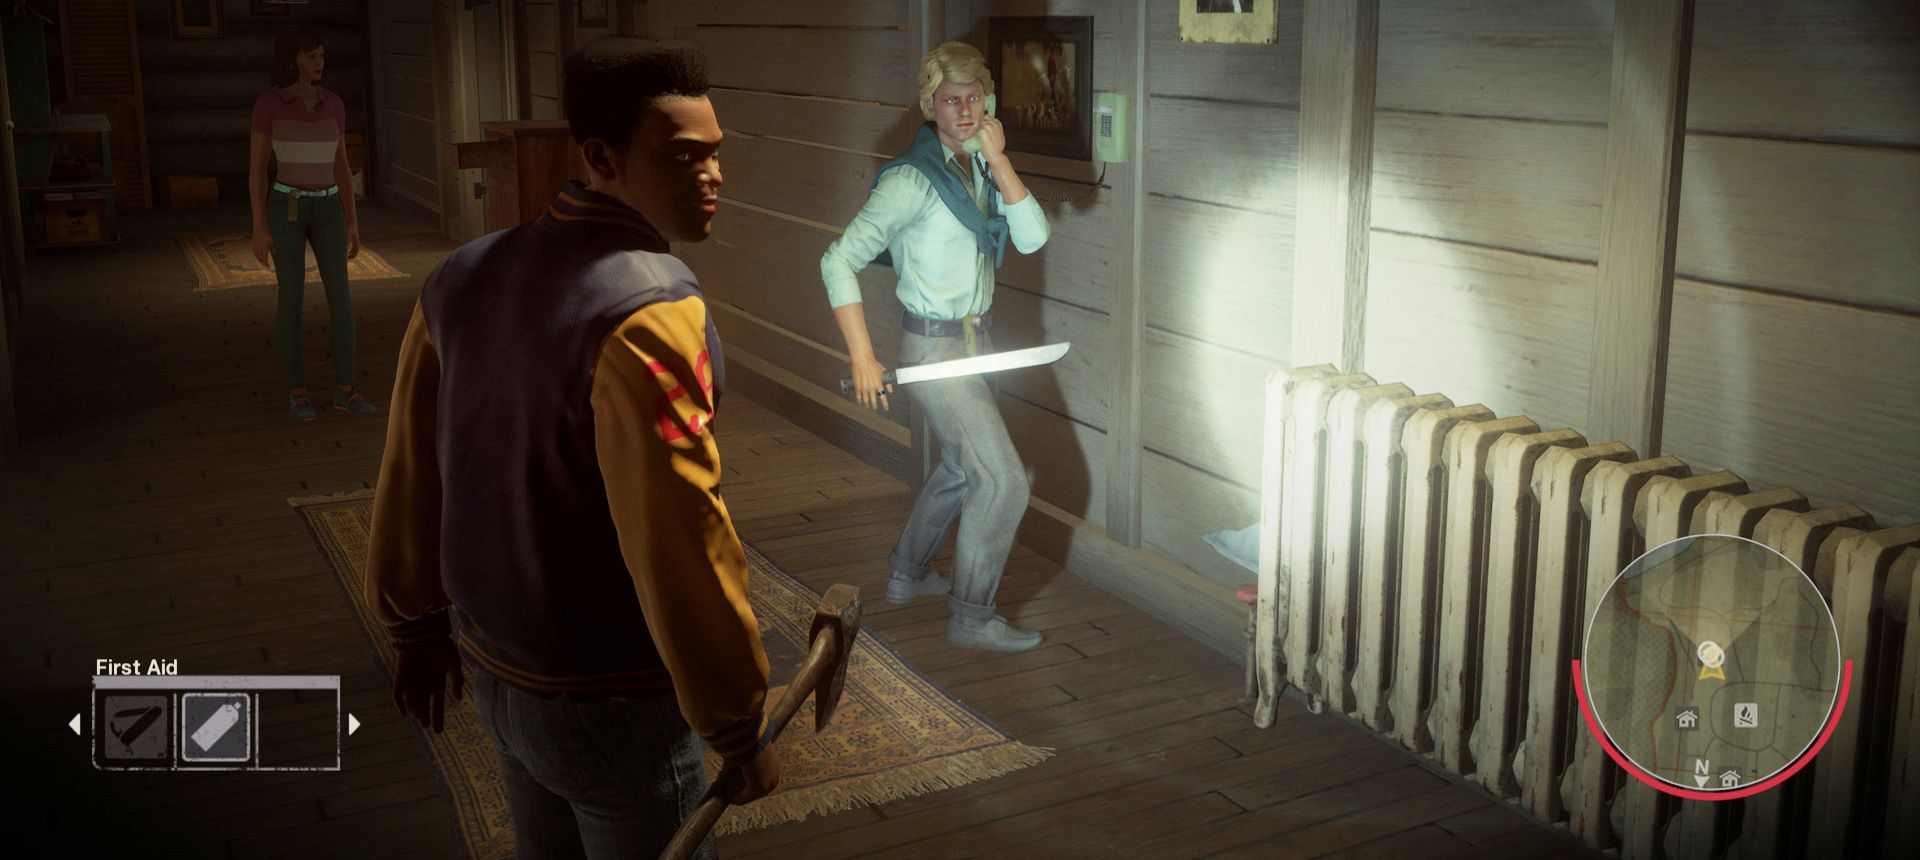 Buggzy shines a flashlight on Chad as he calls the cops in Friday the 13th The Game.